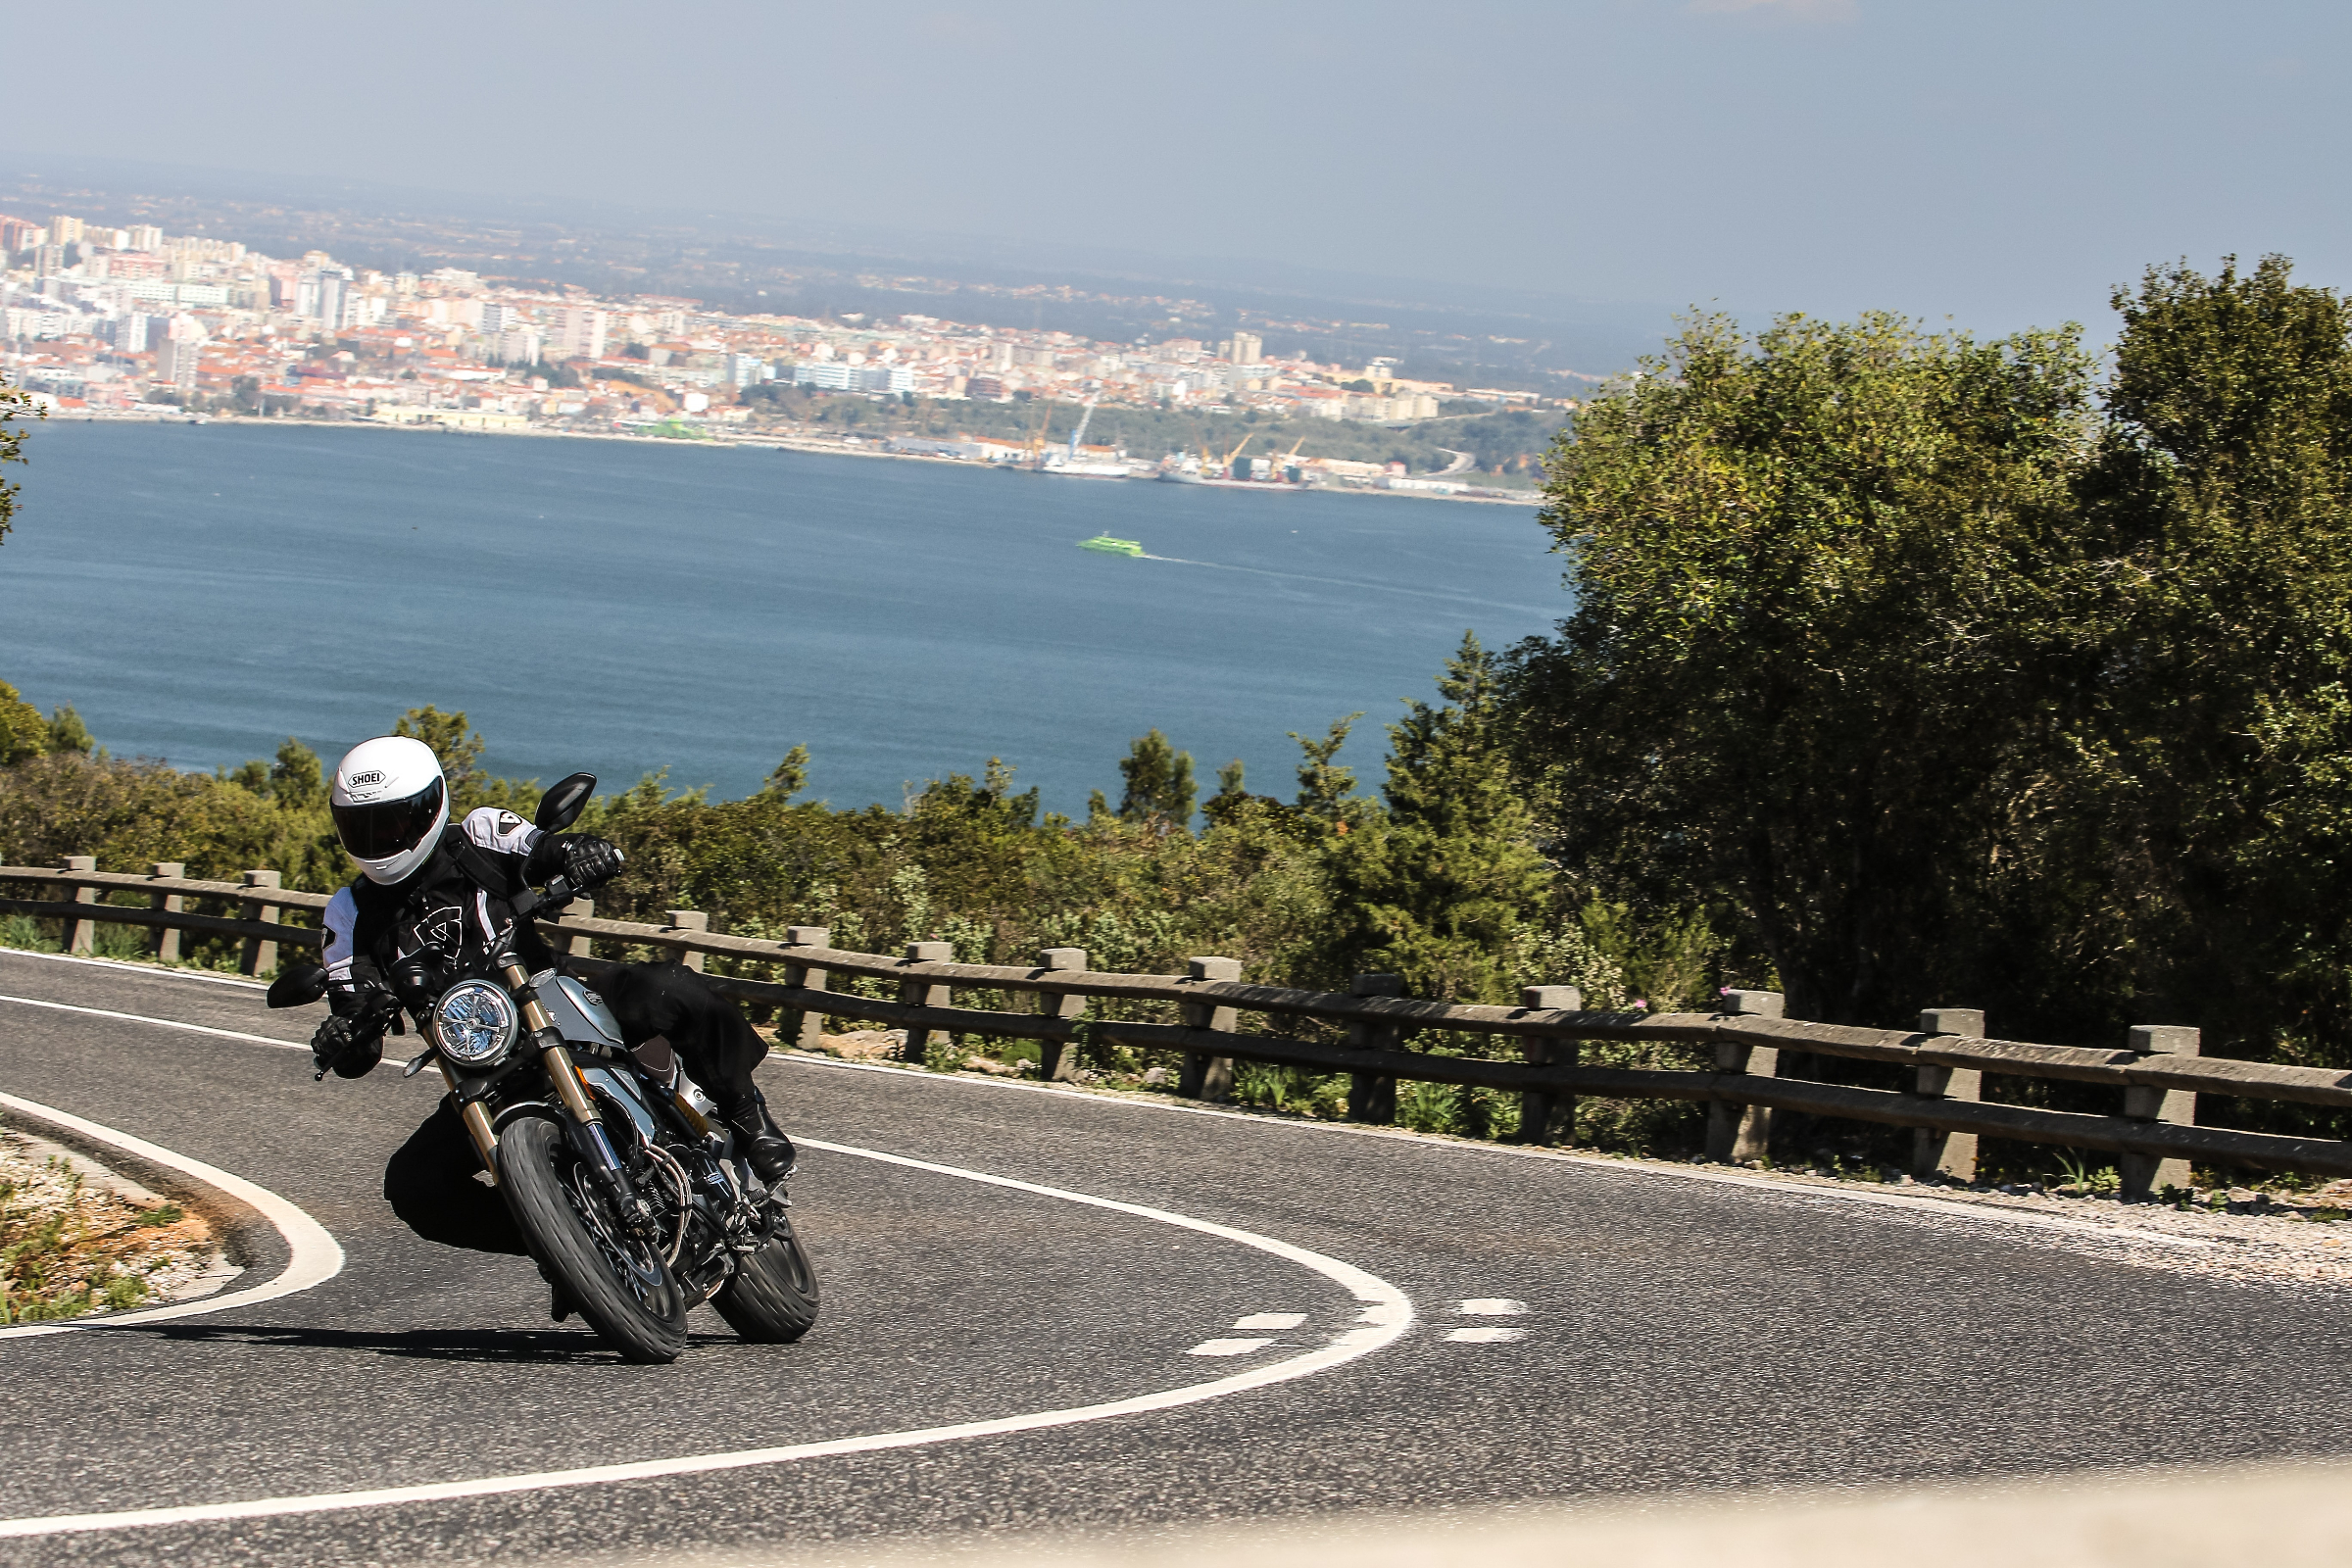 riding a Ducati Scrambler 1100 on a curve on a mountain road with Lisbon, Portugal, in the background